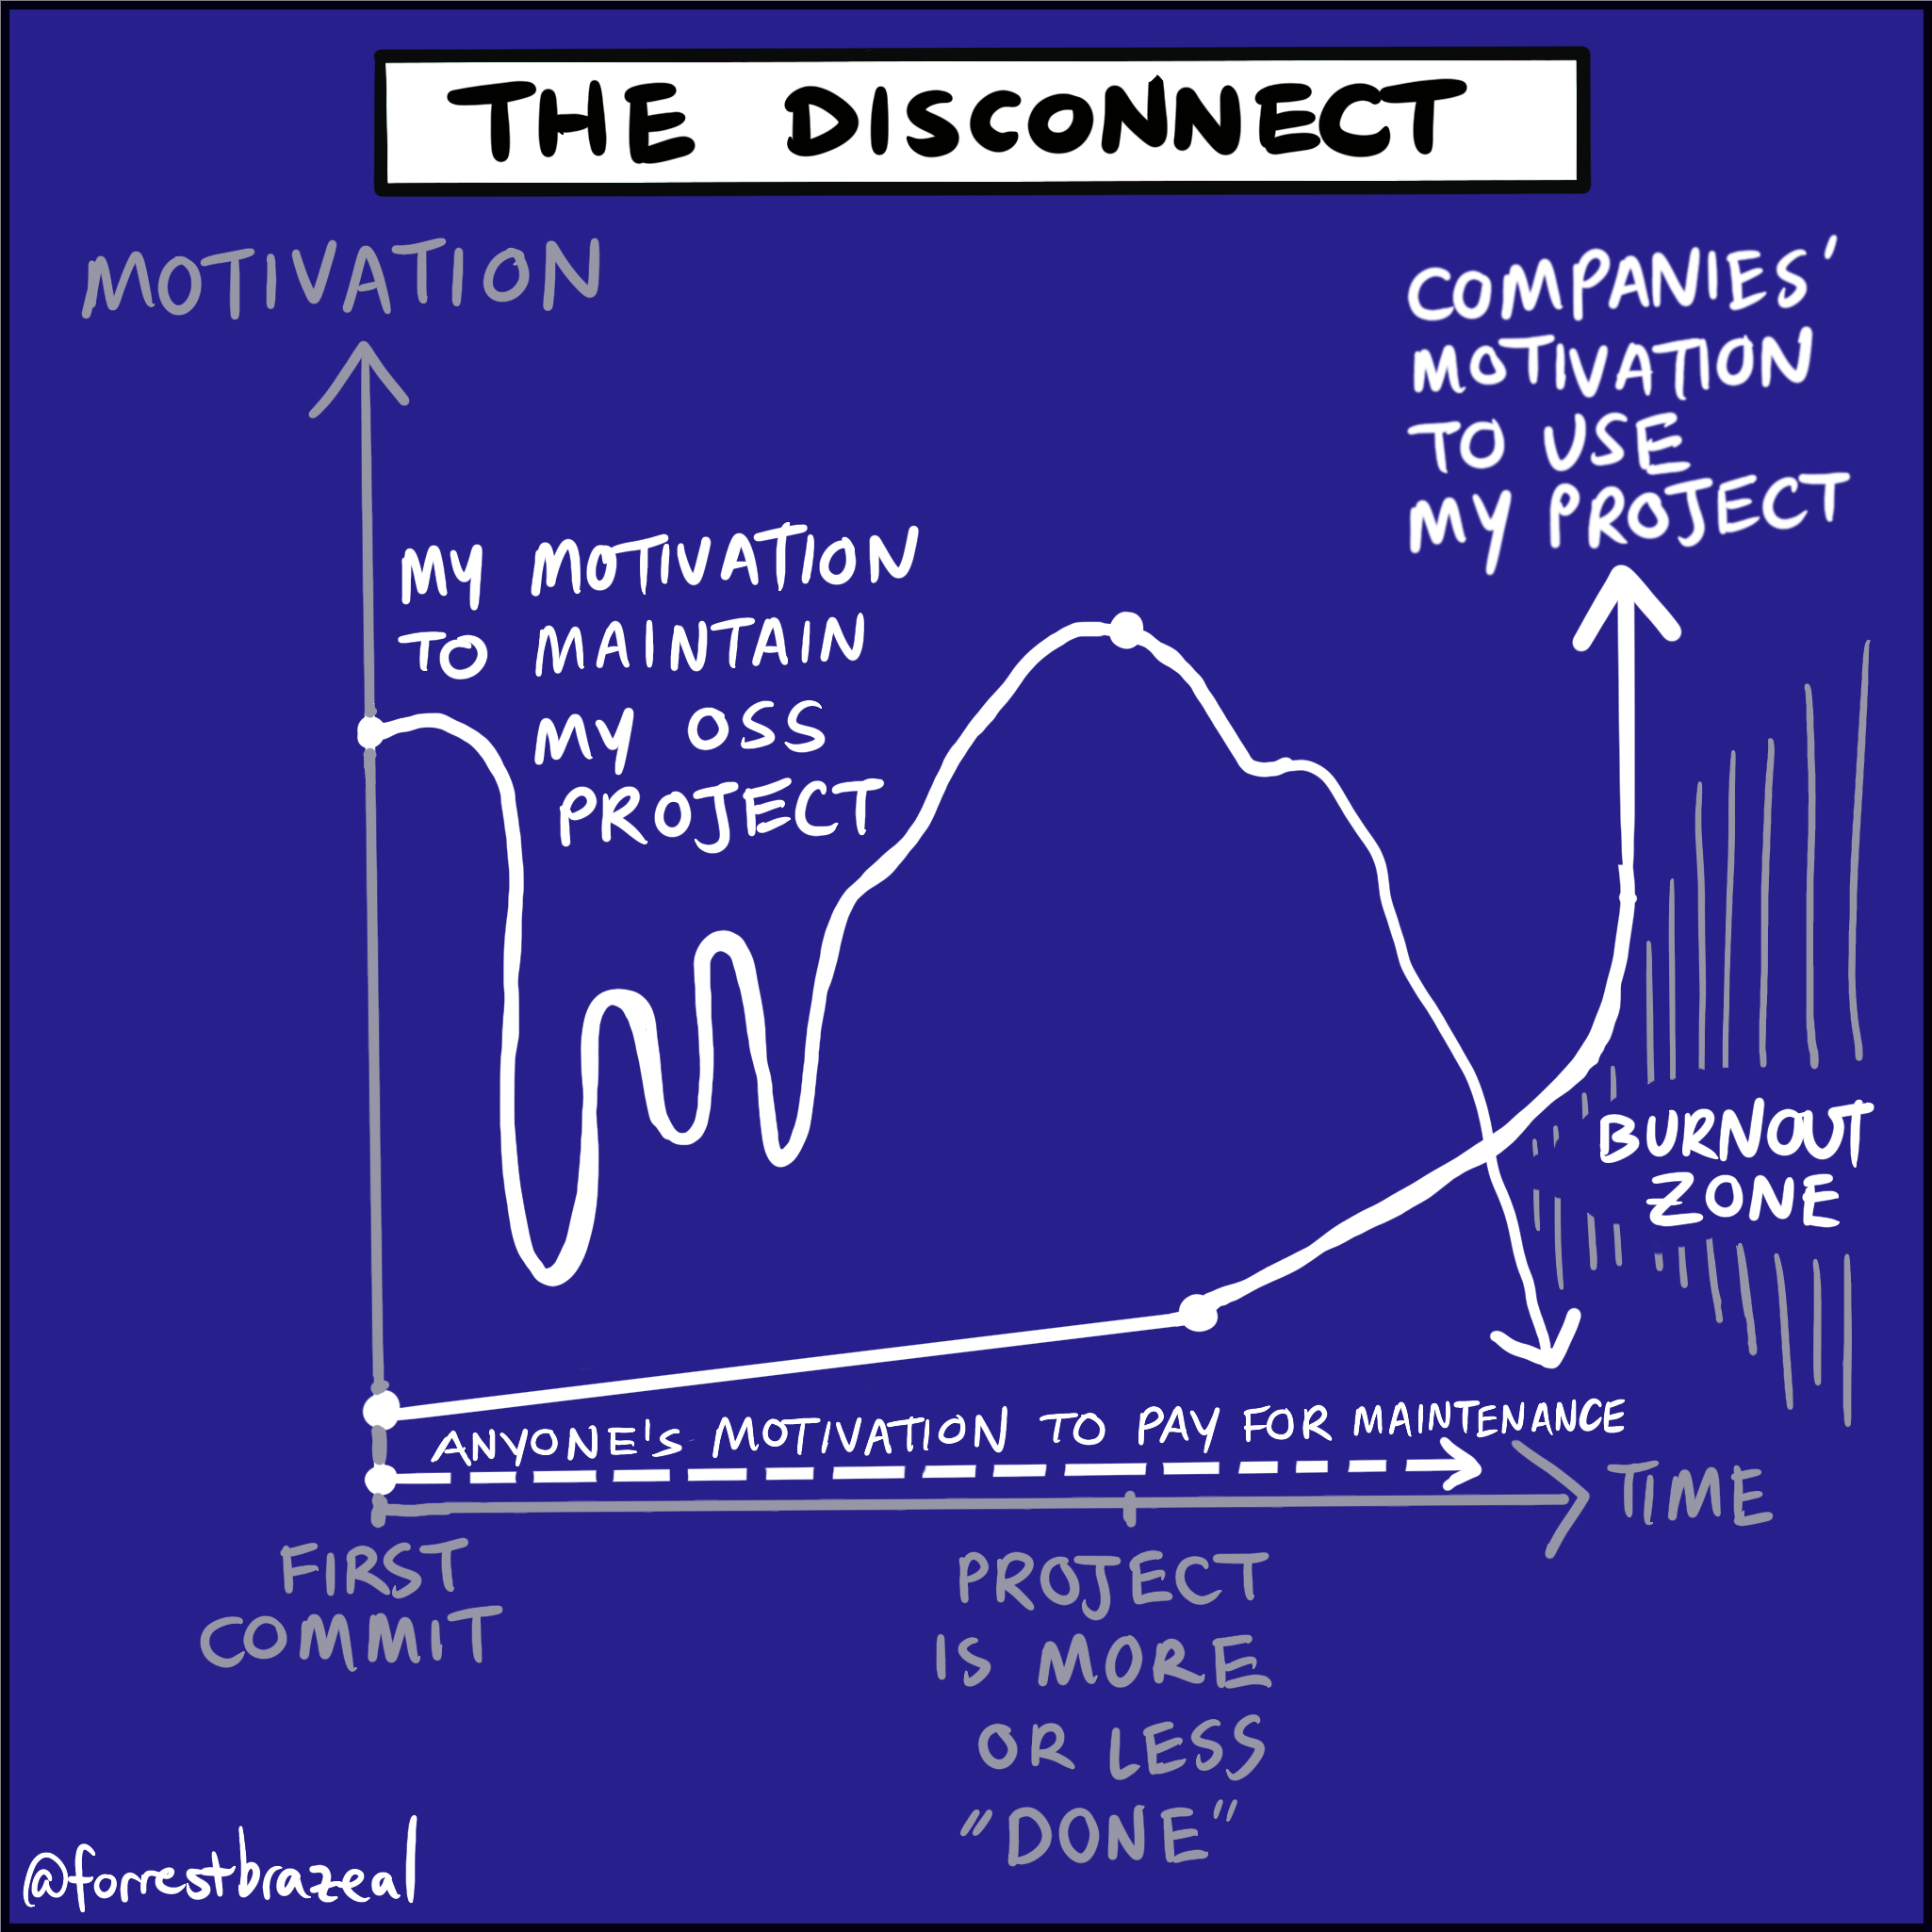 Cartoon by Forrest Brazeal showing the disconnect between maintainer motivation, project usage, and payment for that usage.